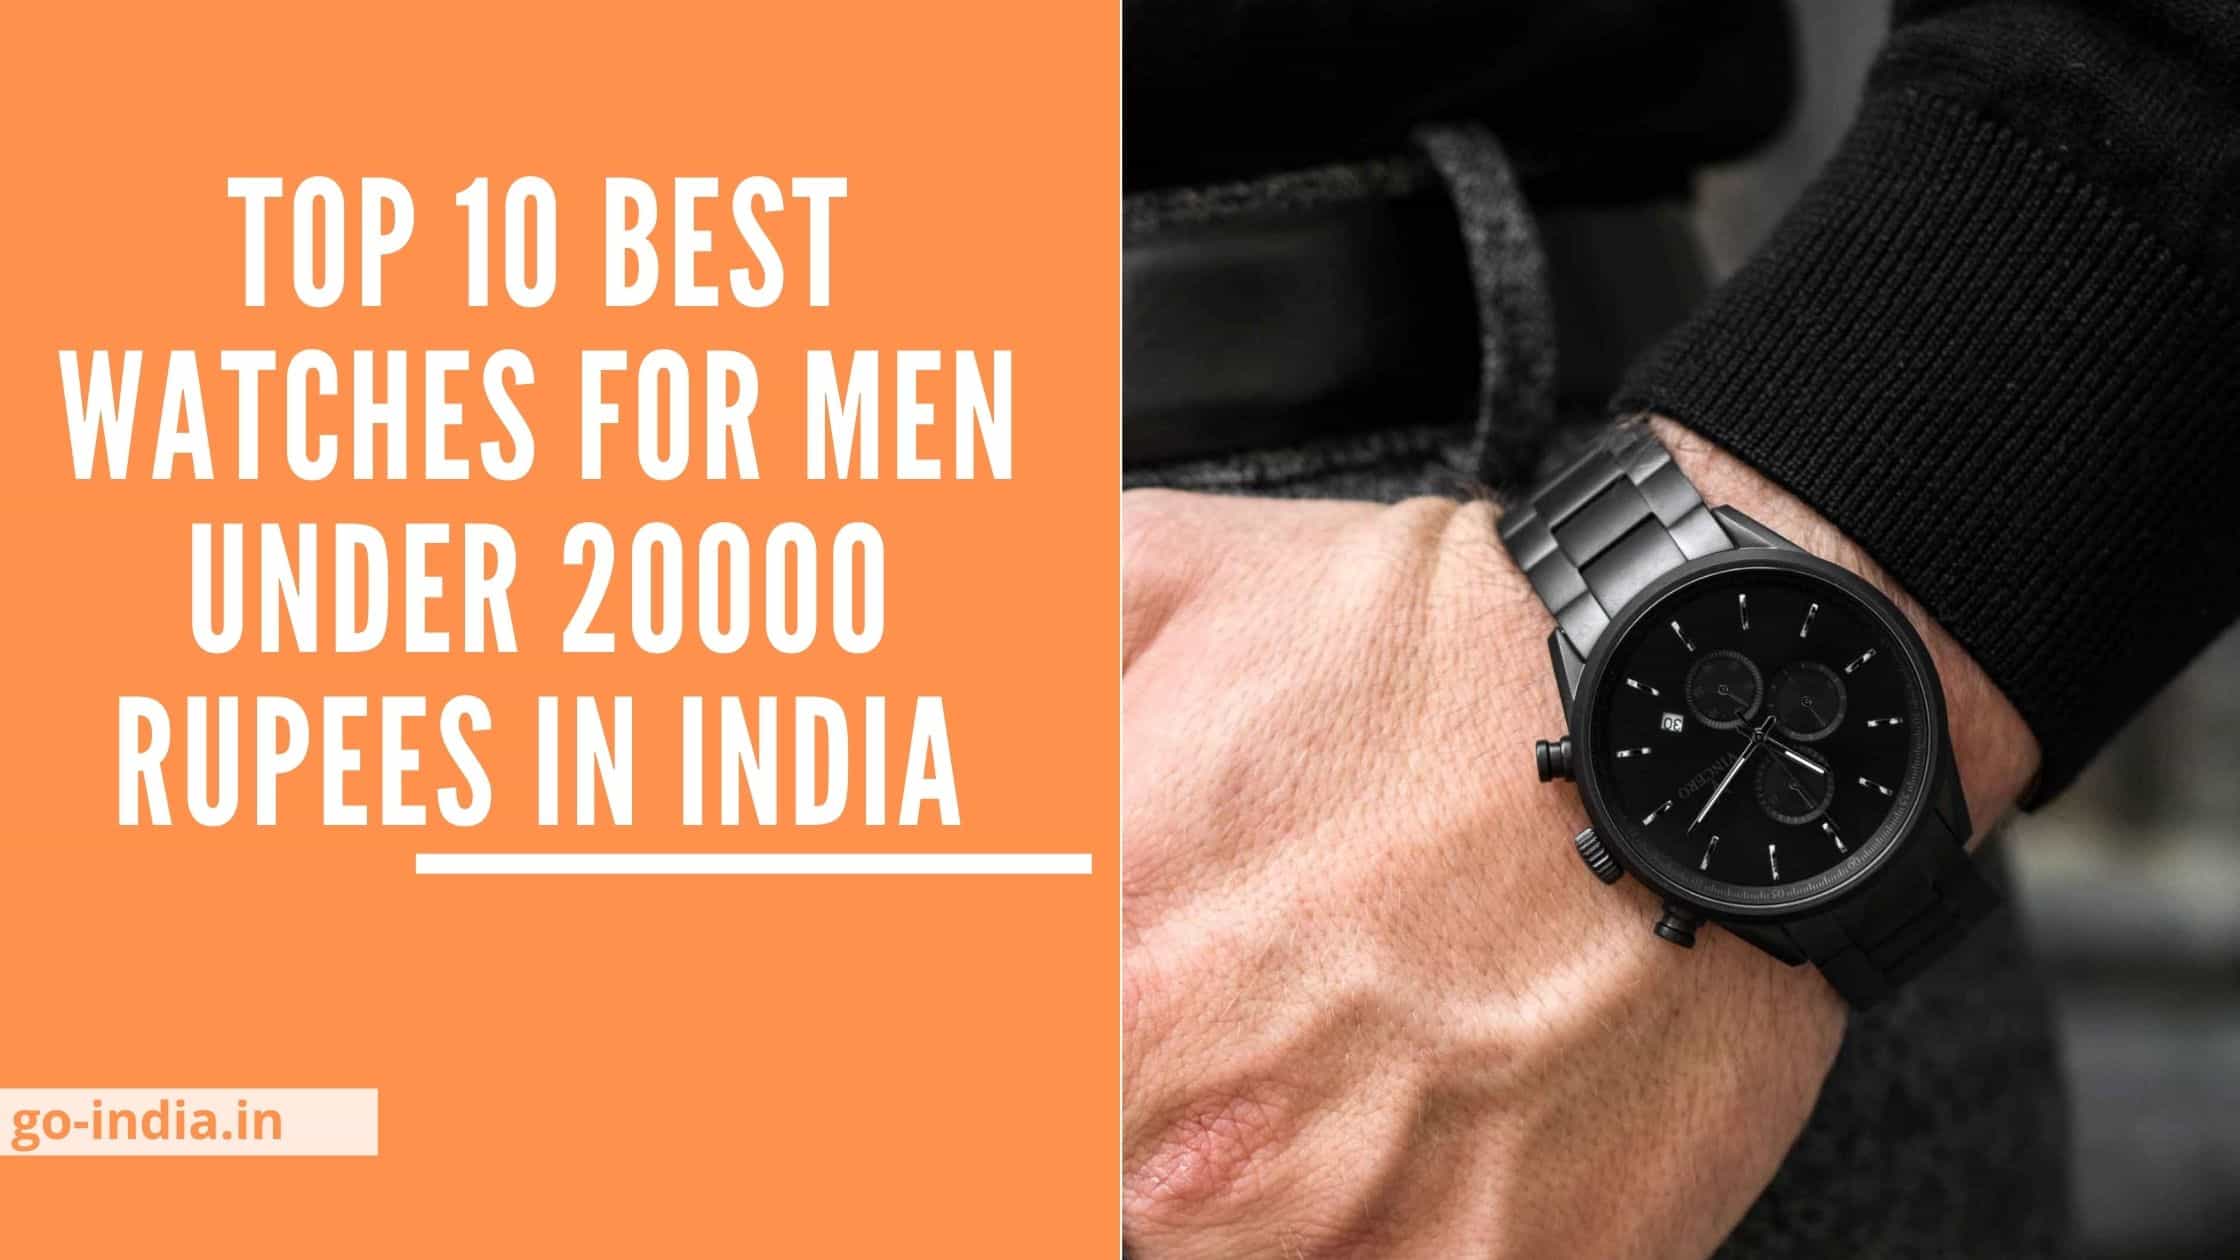 Top 10 Best Watches For Men Under 20000 Rupees in India 2022